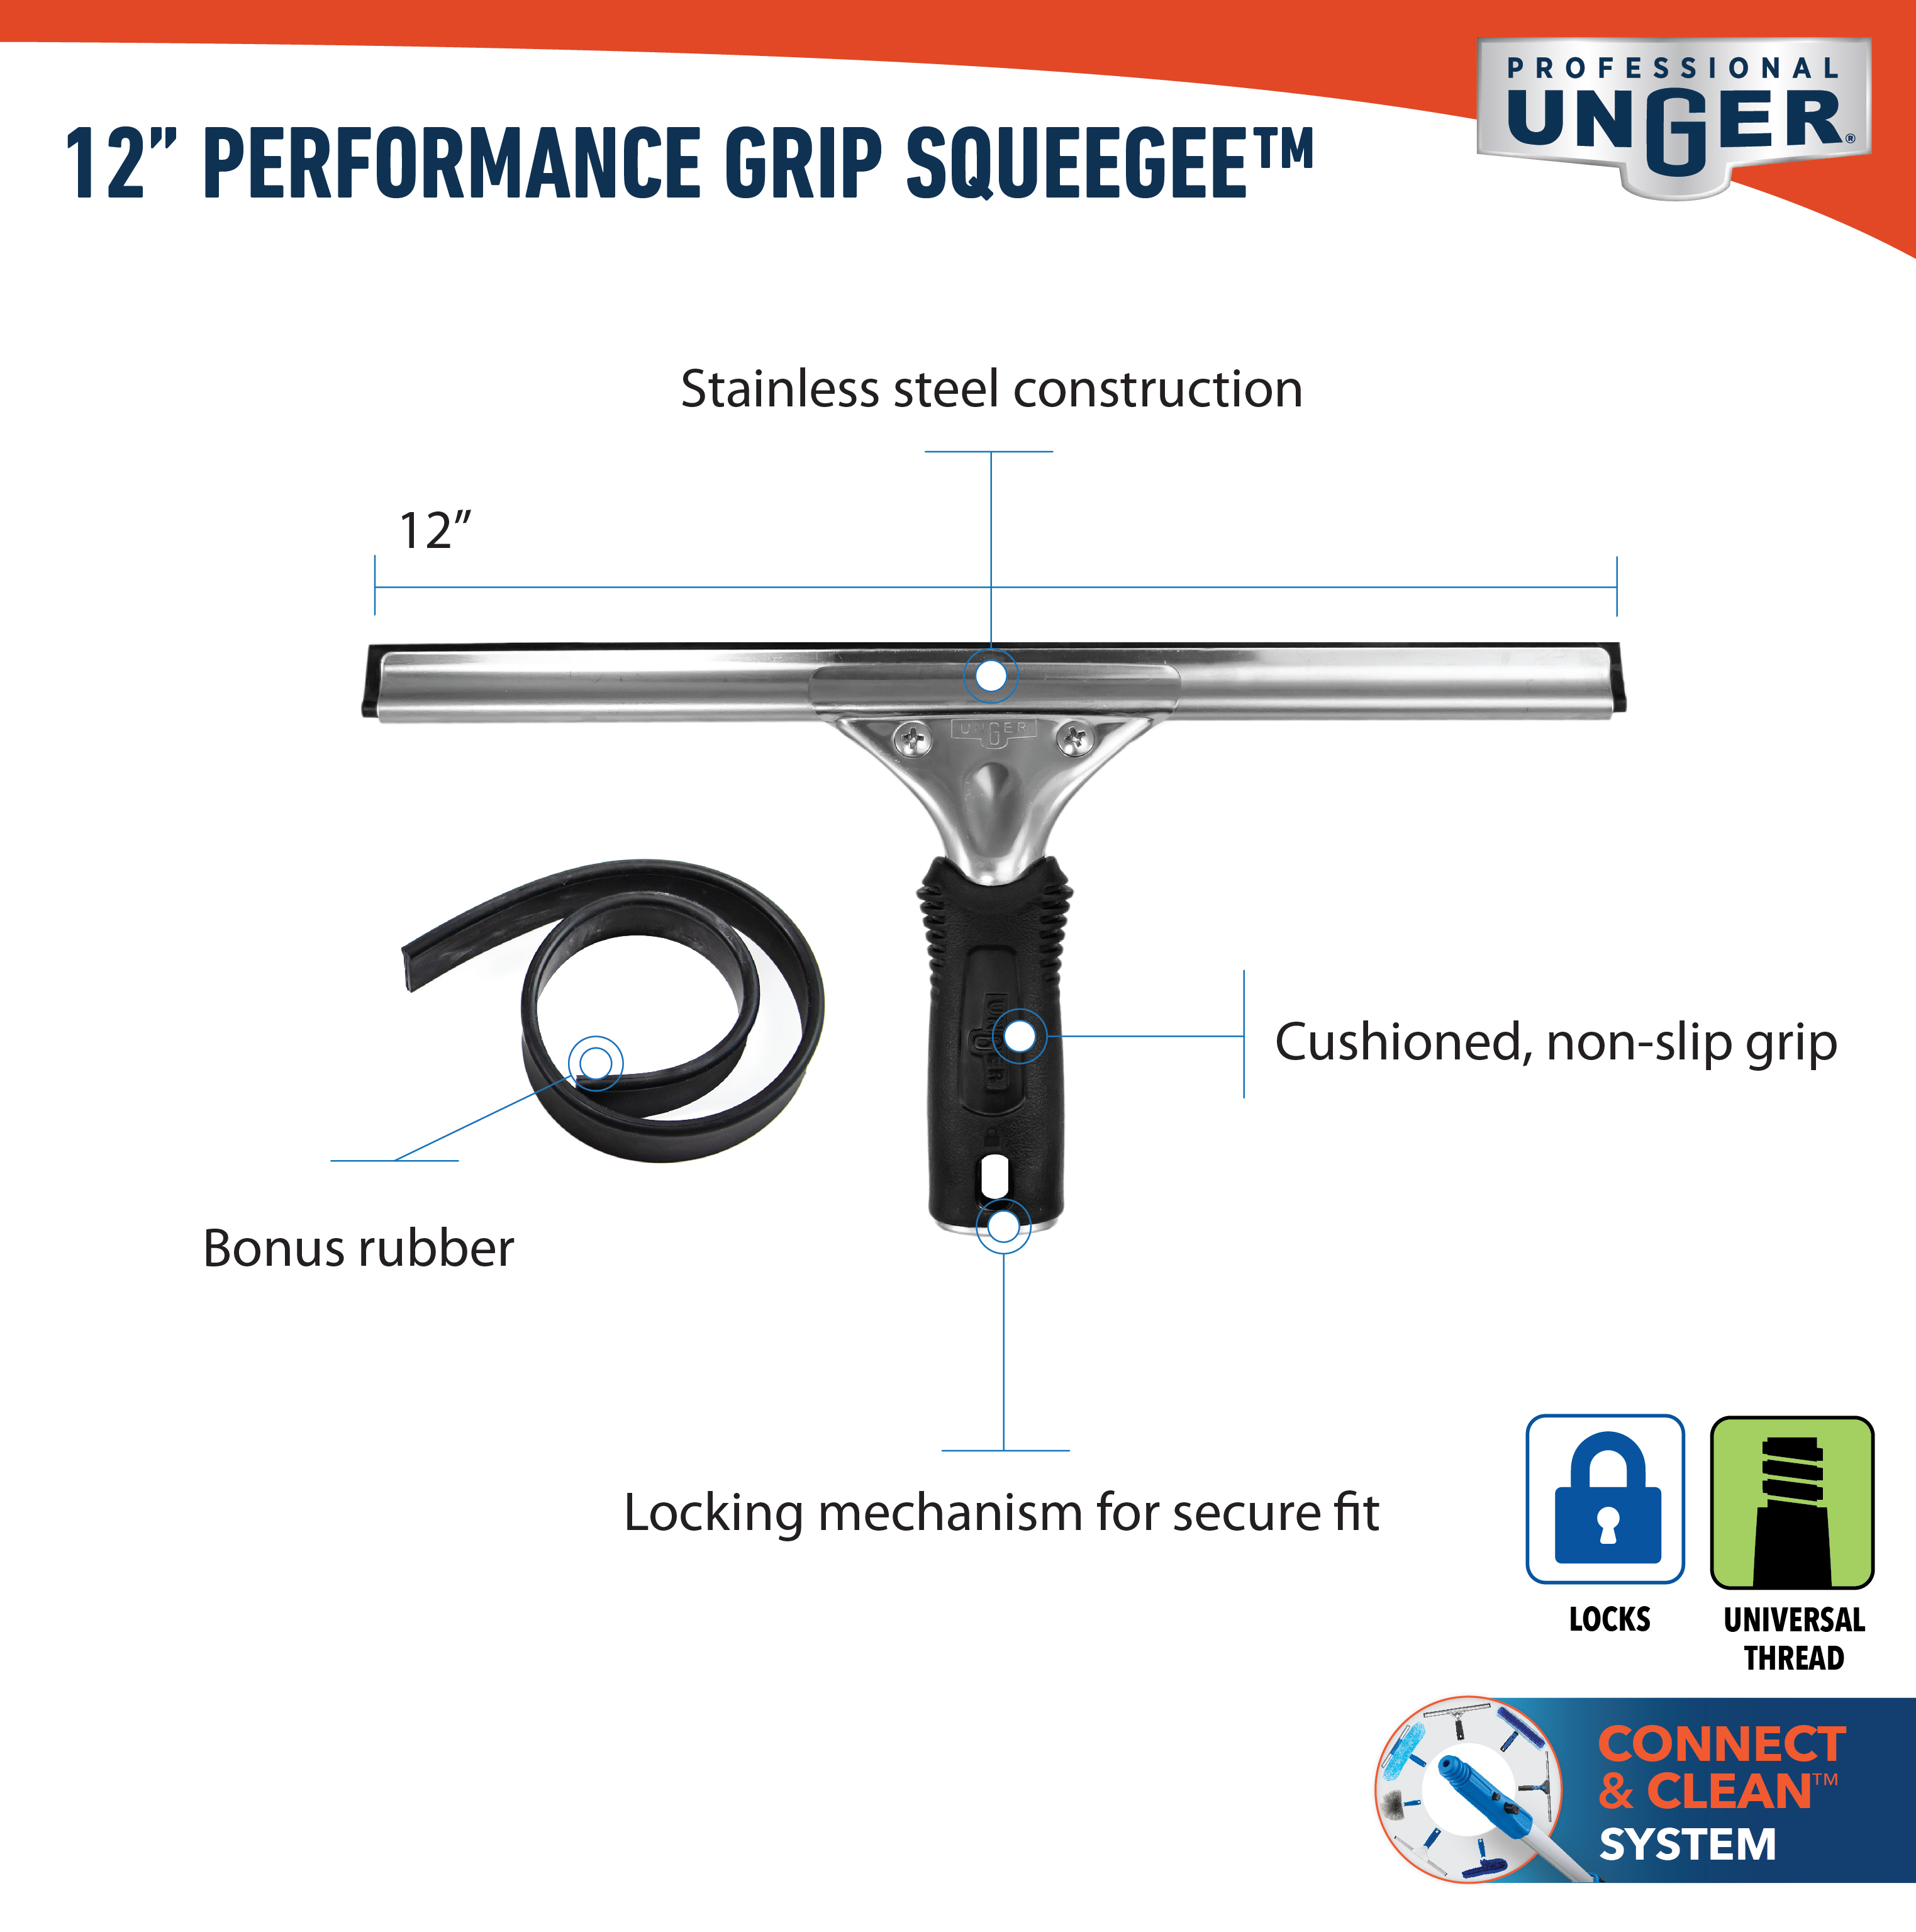 981010_UI_Unger Pro_12 inch Performance Grip Squeegee_Infographics 1